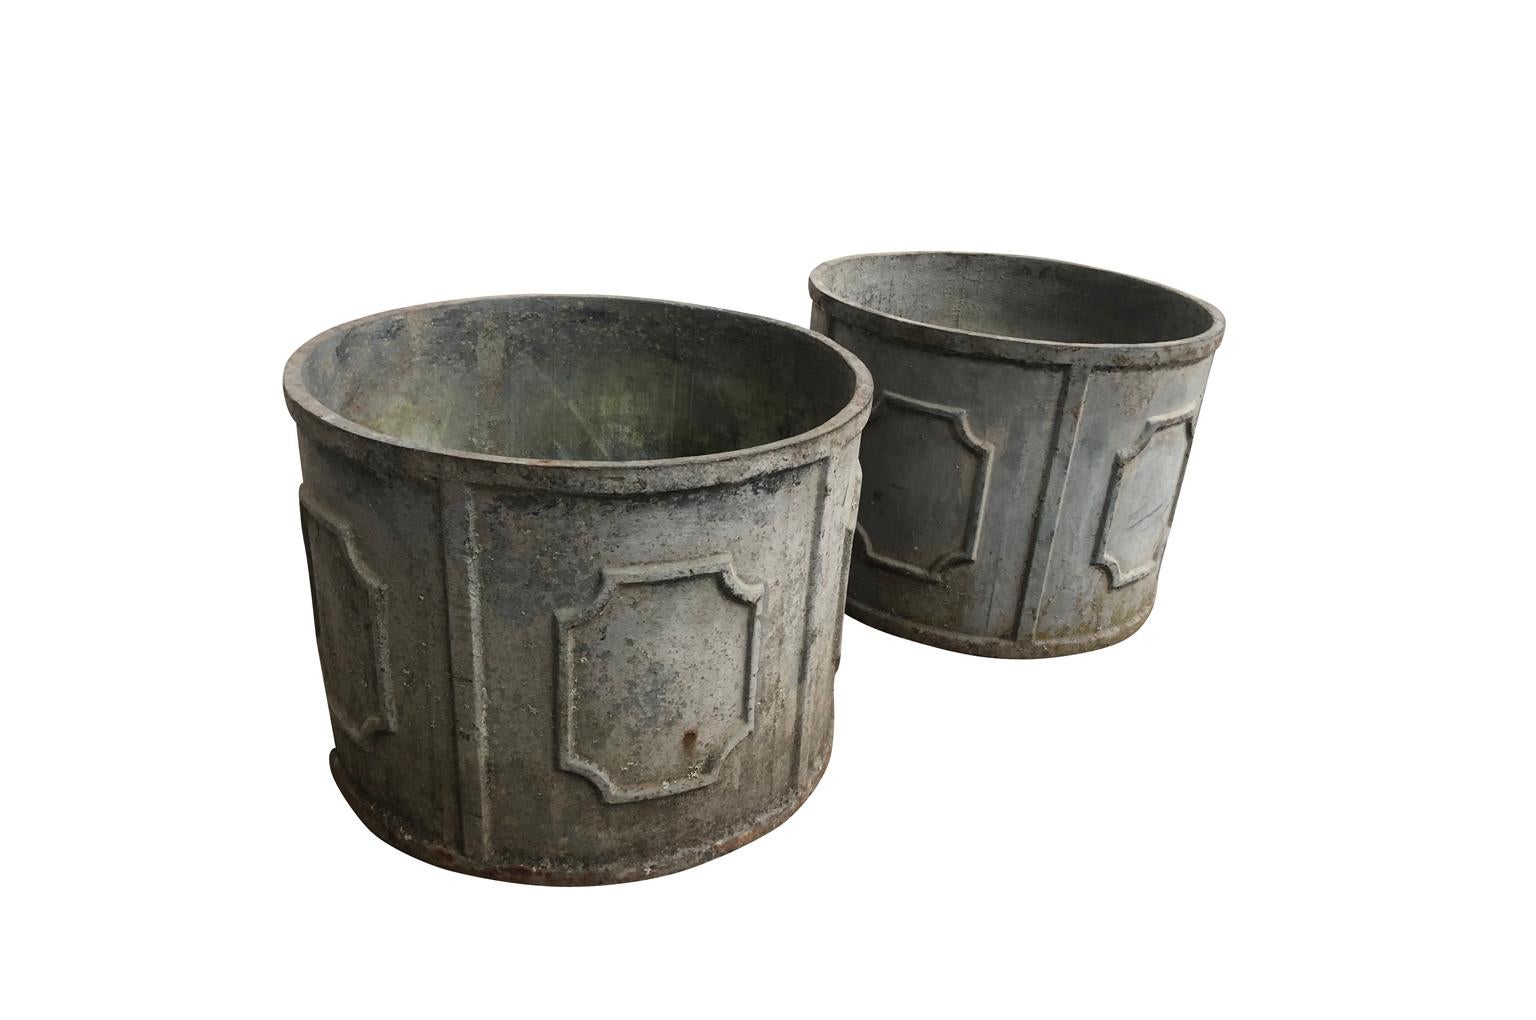 A very handsome pair of early 20th century jardinières from the South of France. Wonderfully constructed from patinated cast iron. Beautiful for any garden or interior.